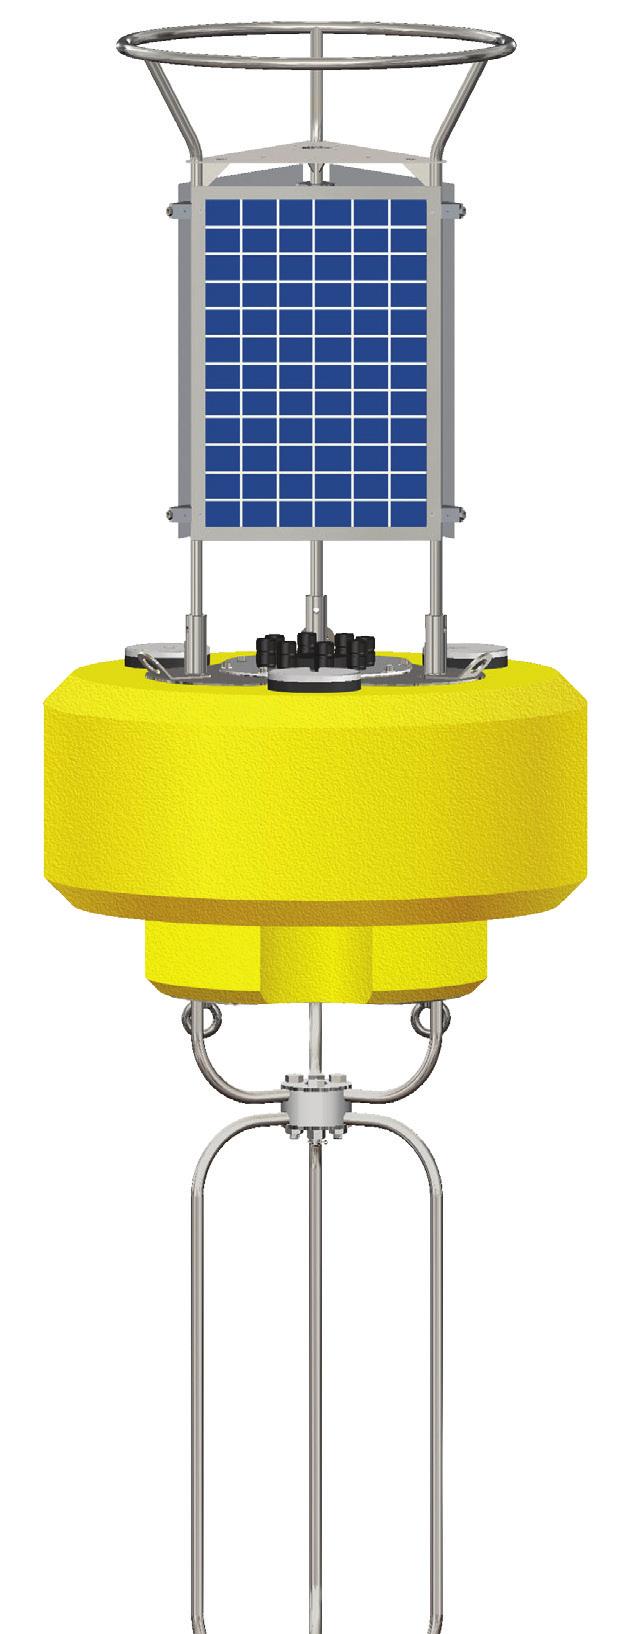 CB-650 specifications Hull Dimensions Tower Dimensions Data Well Dimensions Weight Buoyancy Hull Material Tower /Hardware Material Other Material Mooring Attachments Solar Power 38 (96.